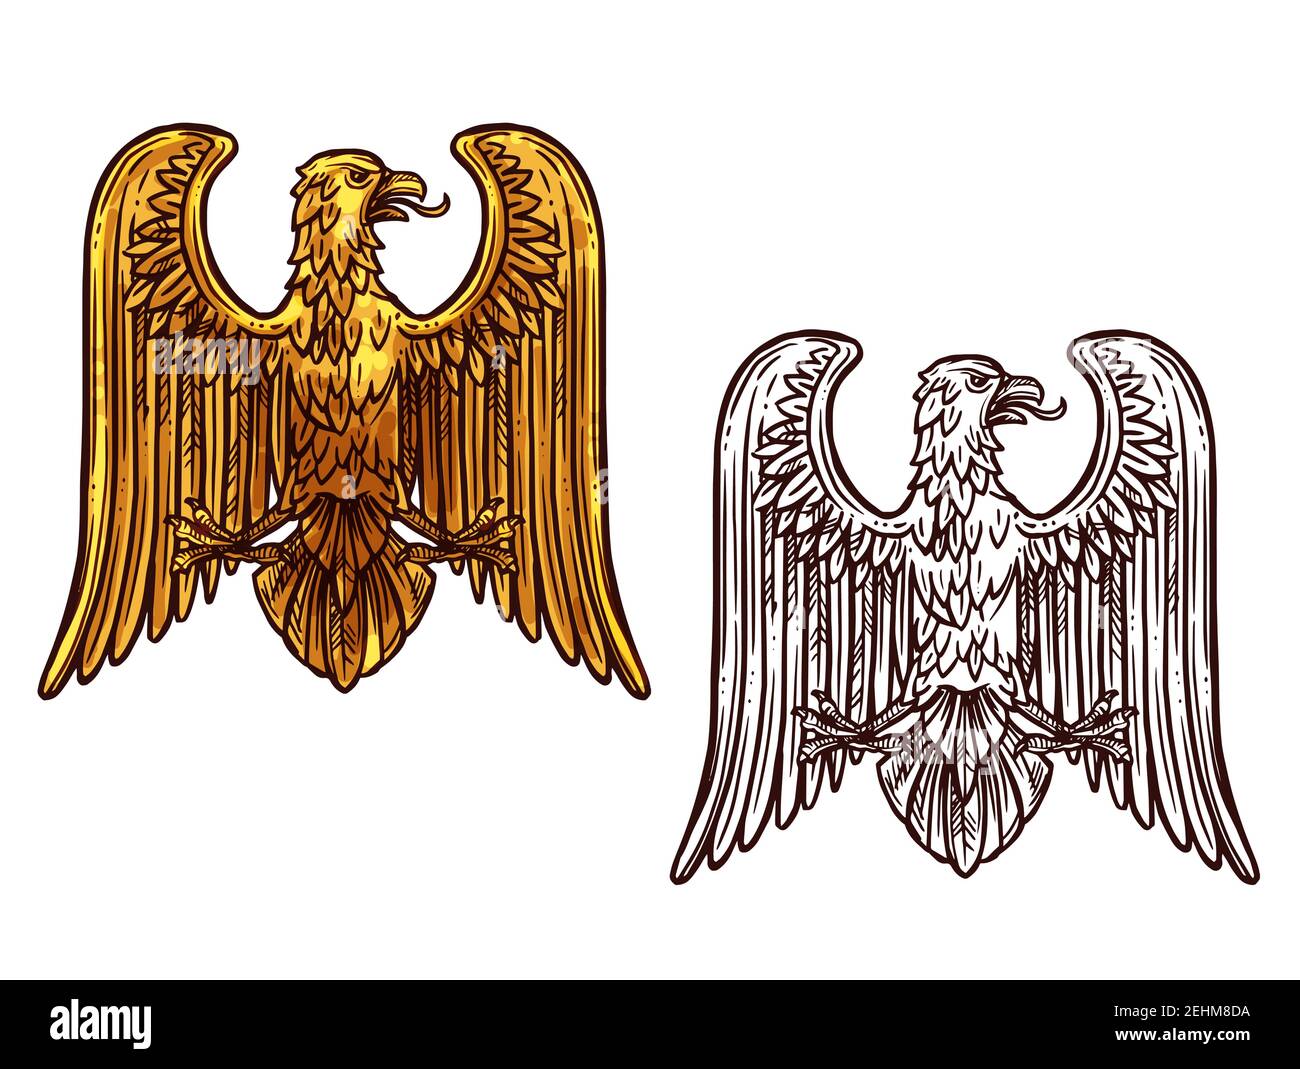 Heraldic eagle golden statue and sketch icon. Griffin coat of arms, hawk symbol of power and strength, outline golden eagle, vintage vector. Bird for Stock Vector